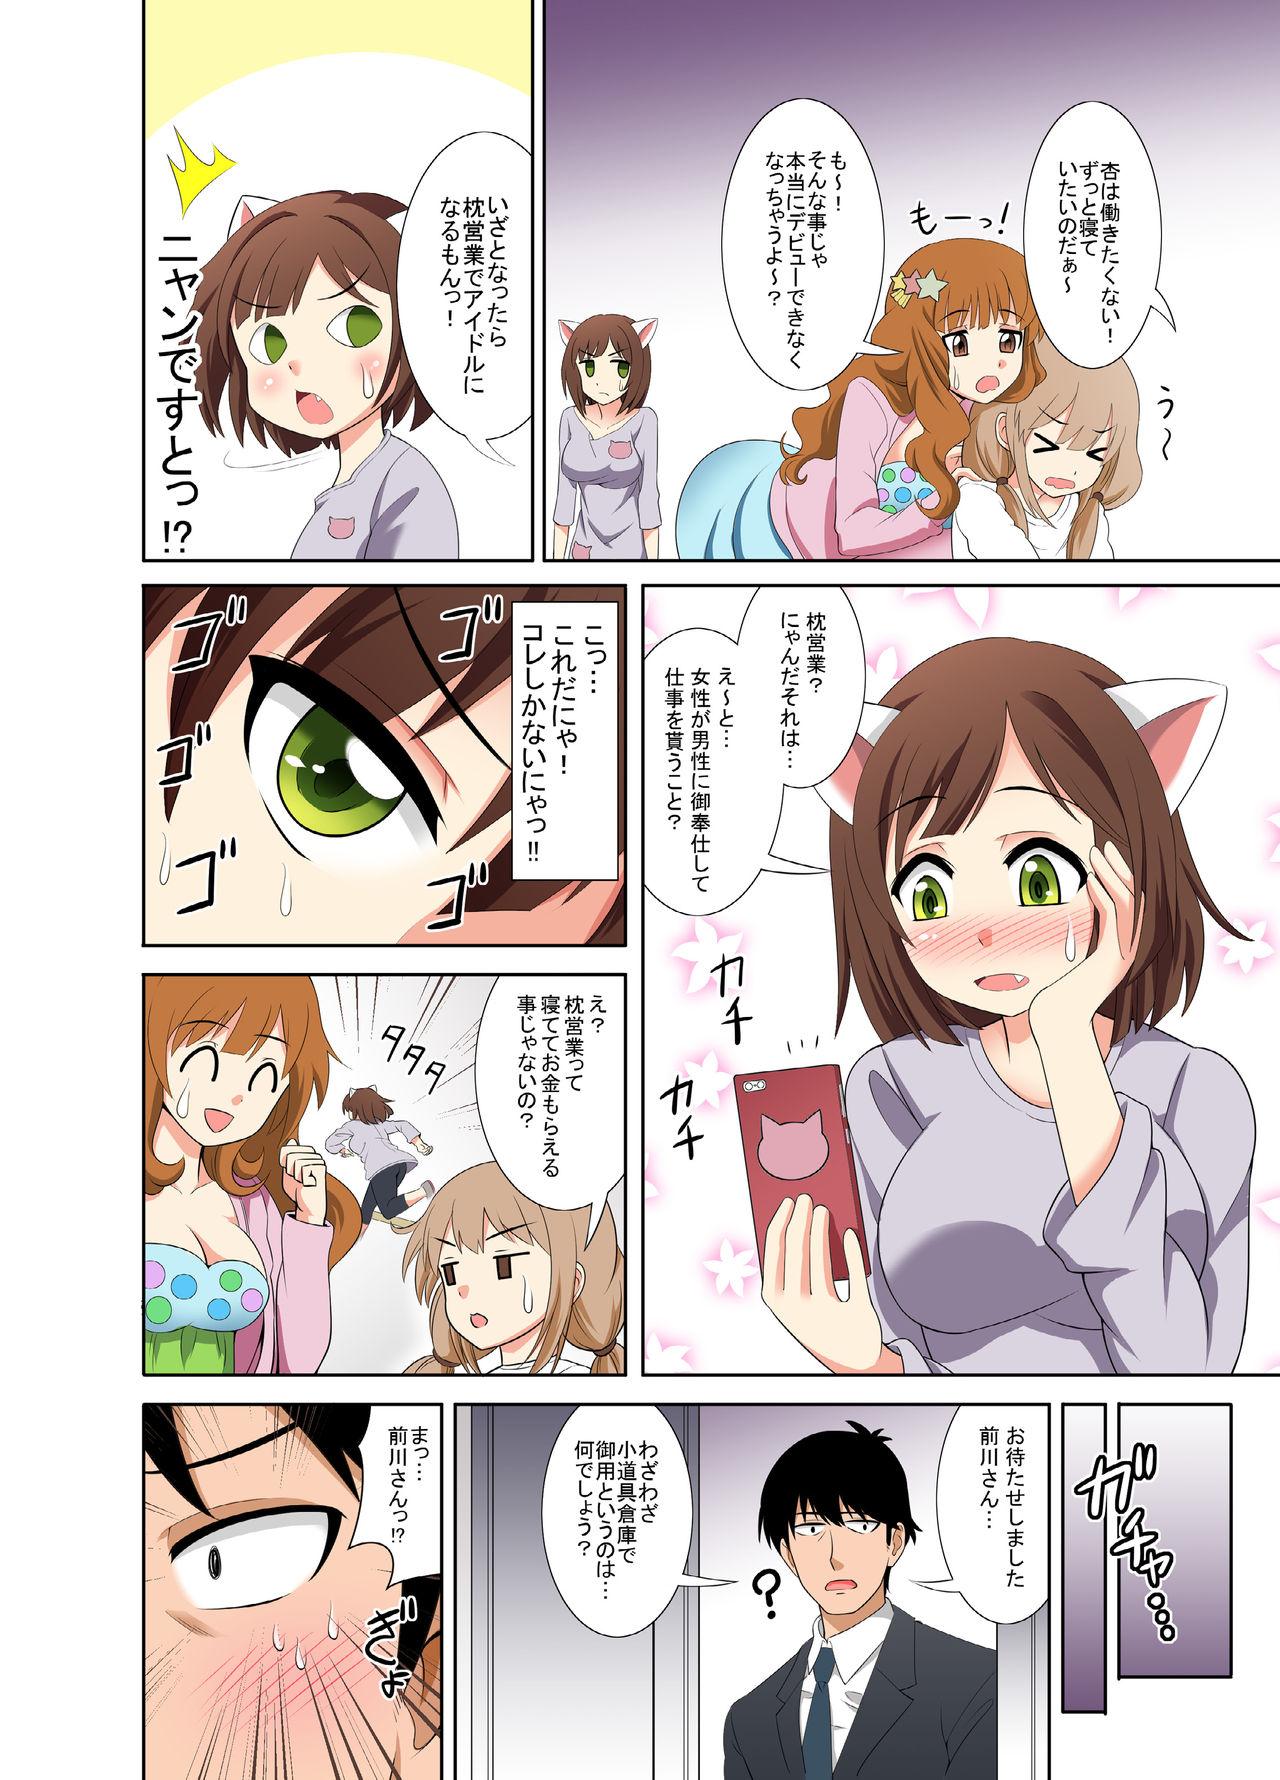 Curious Mat Sex - The idolmaster Huge - Page 4